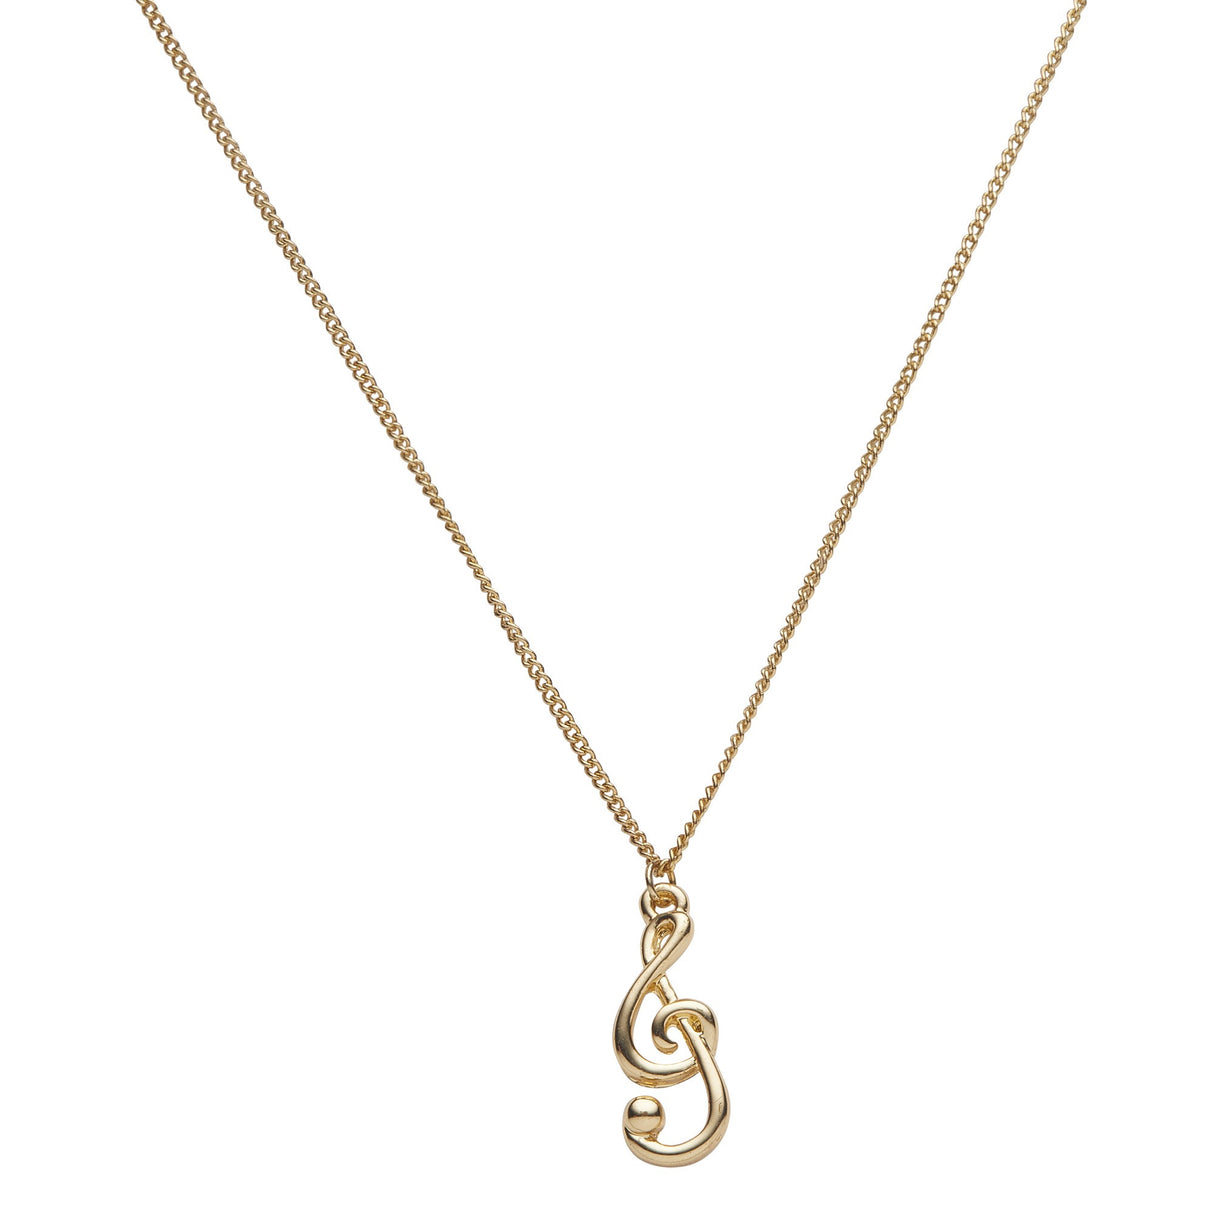 Pastel Chic Musical Note Necklace